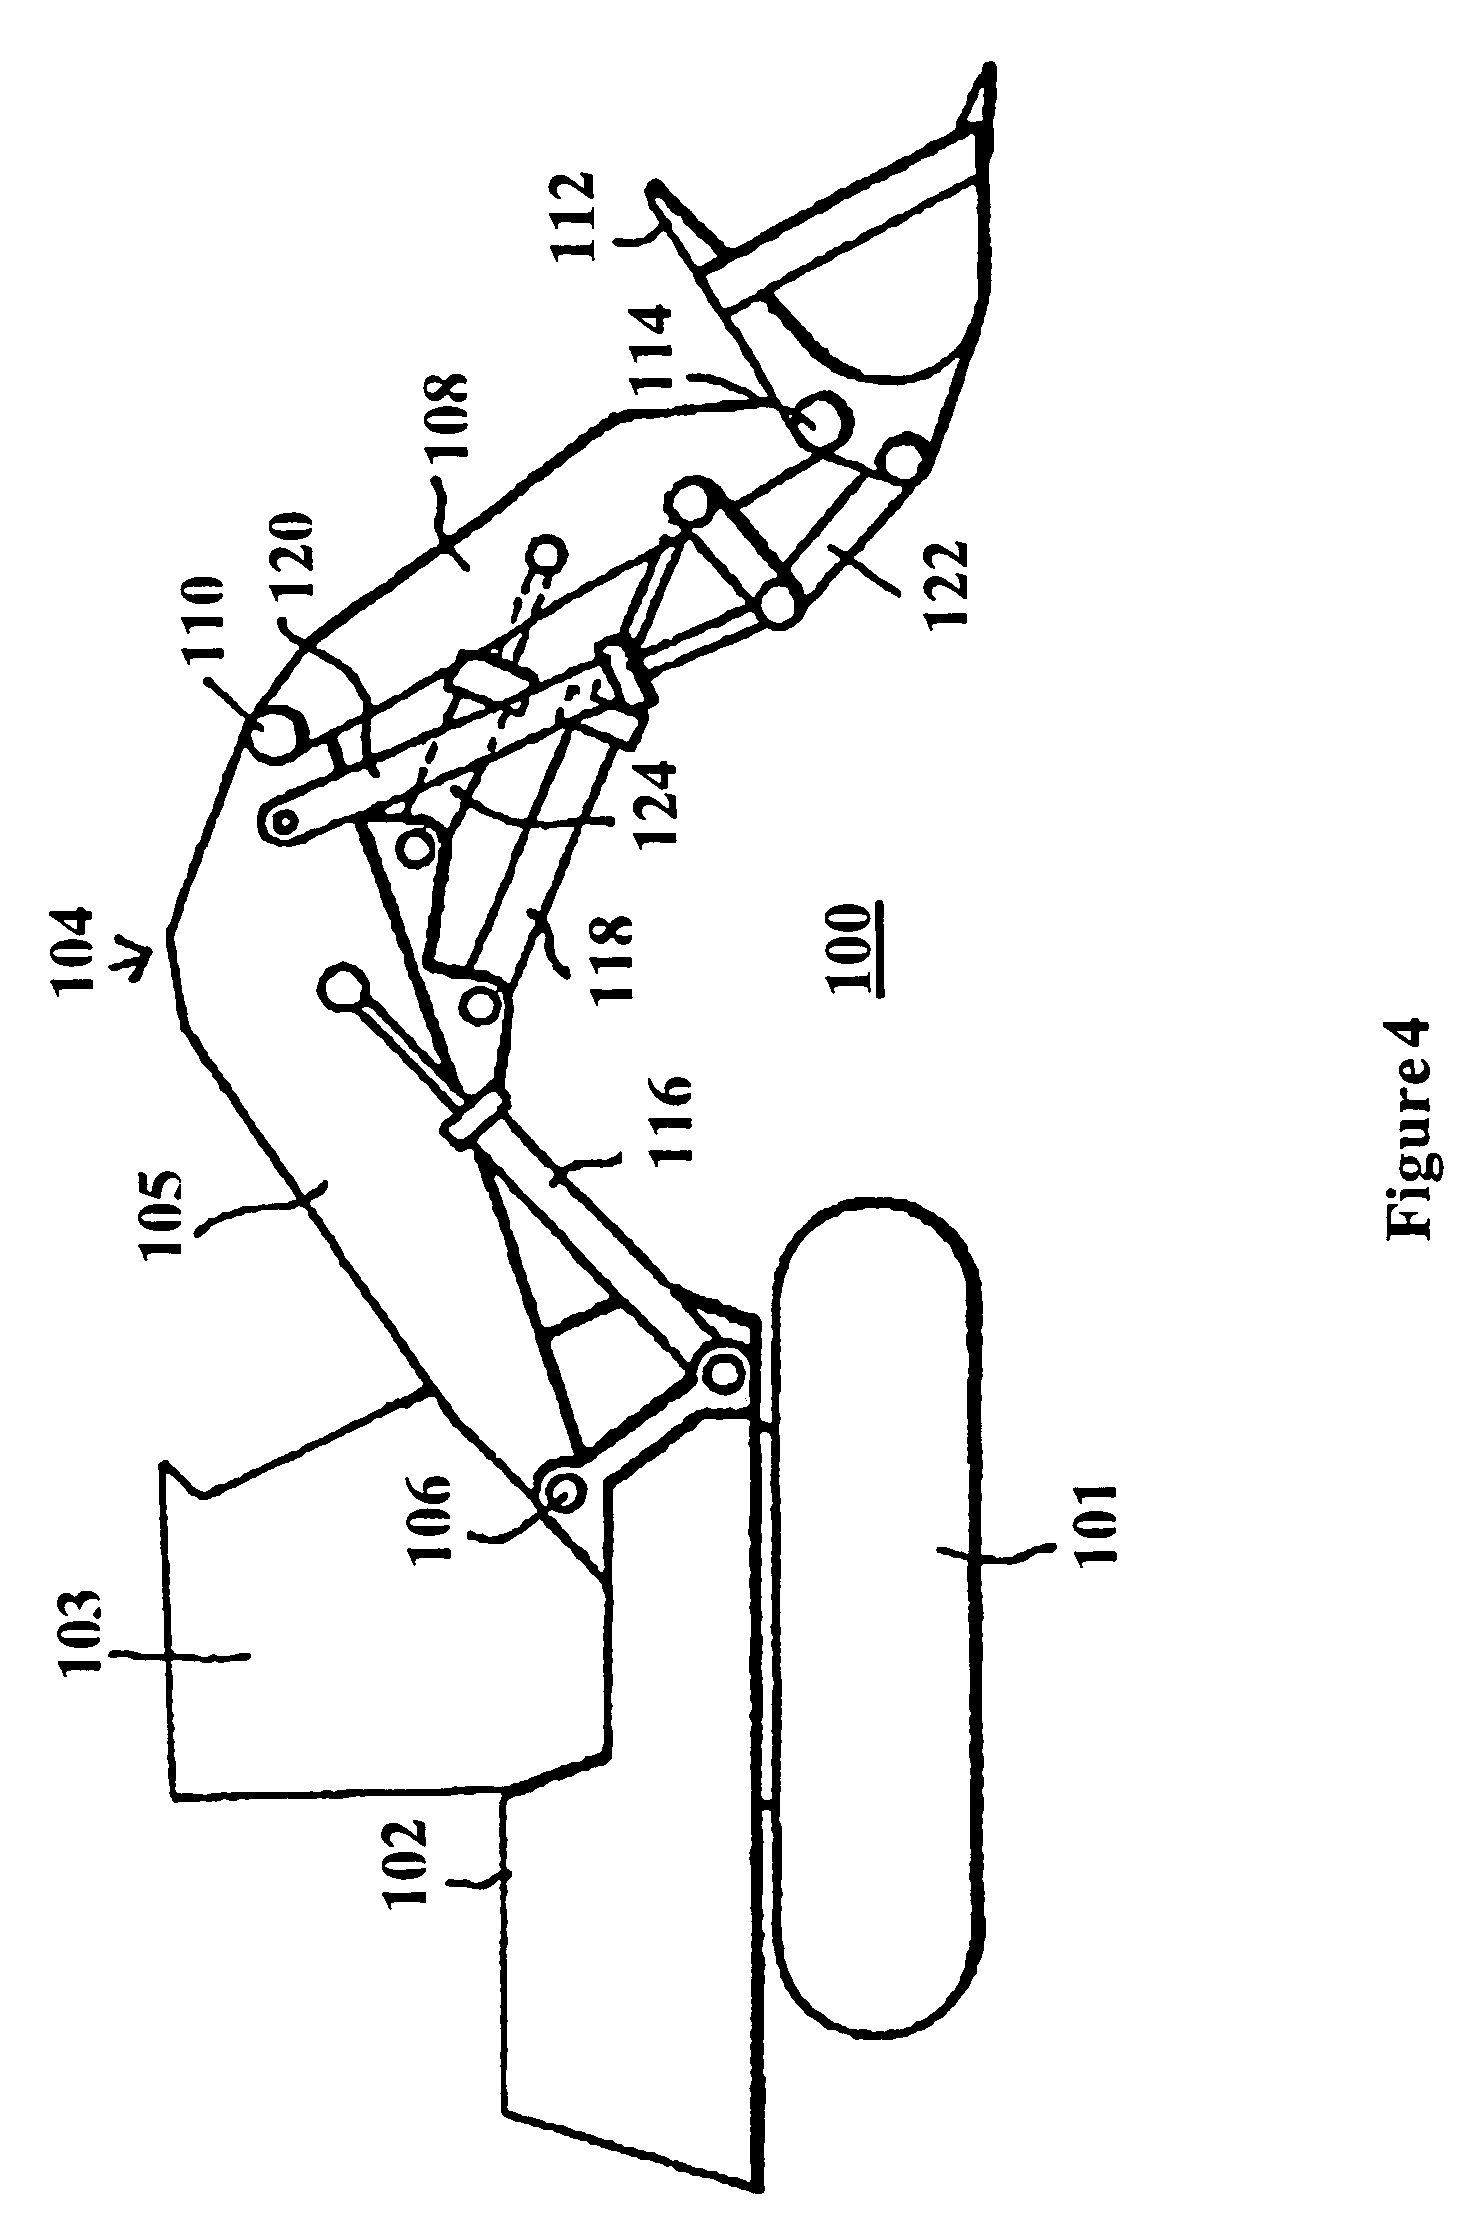 Coordinated joint motion control system